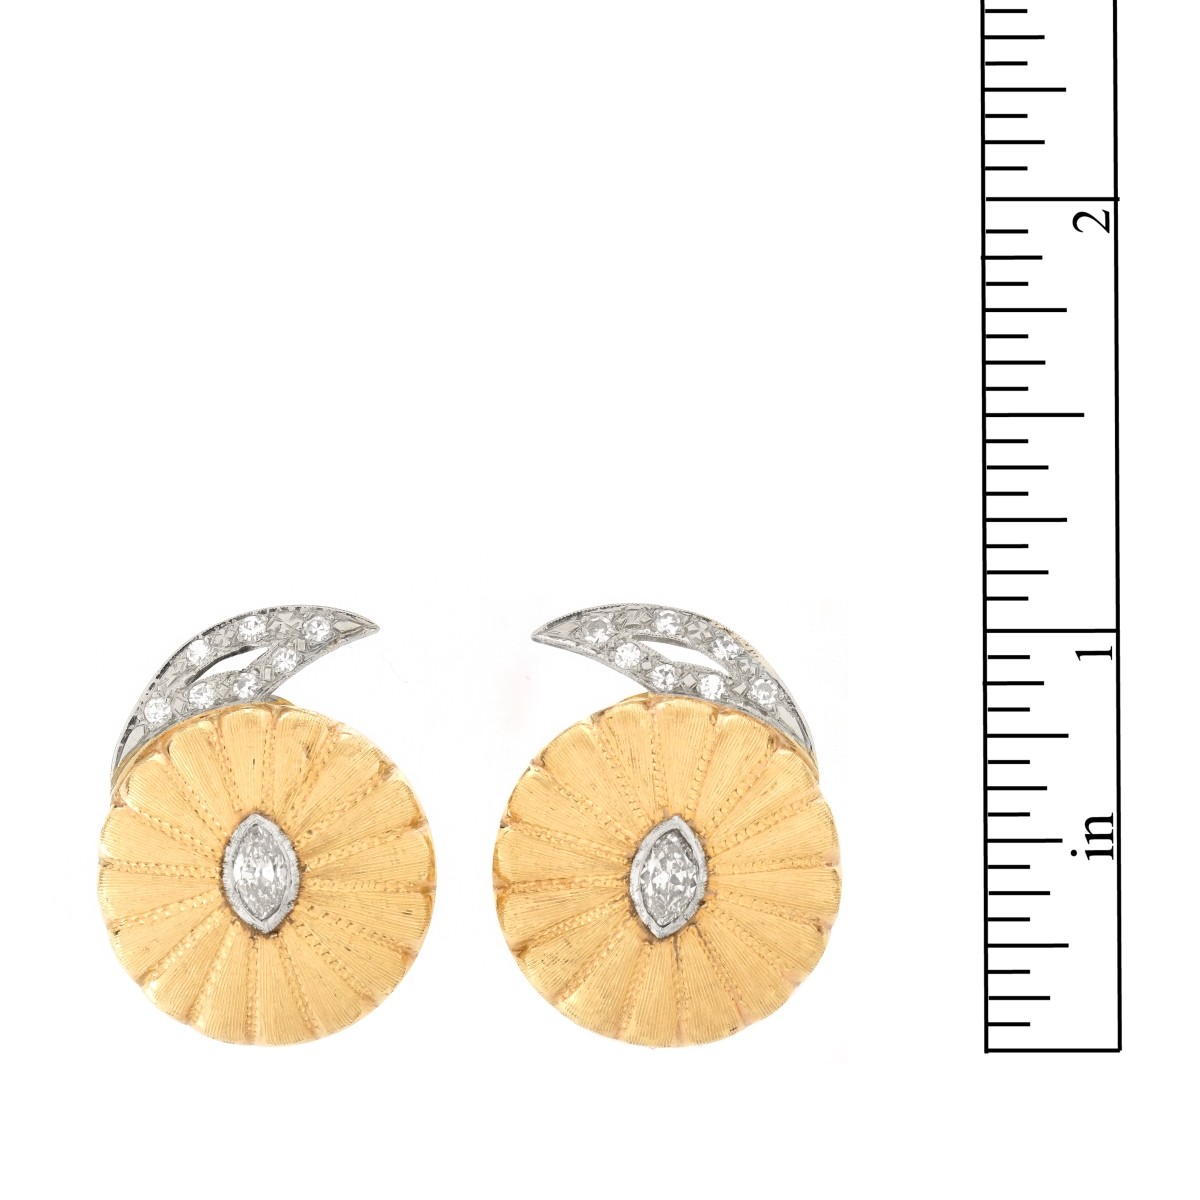 Antique Diamond and 14K Earrings